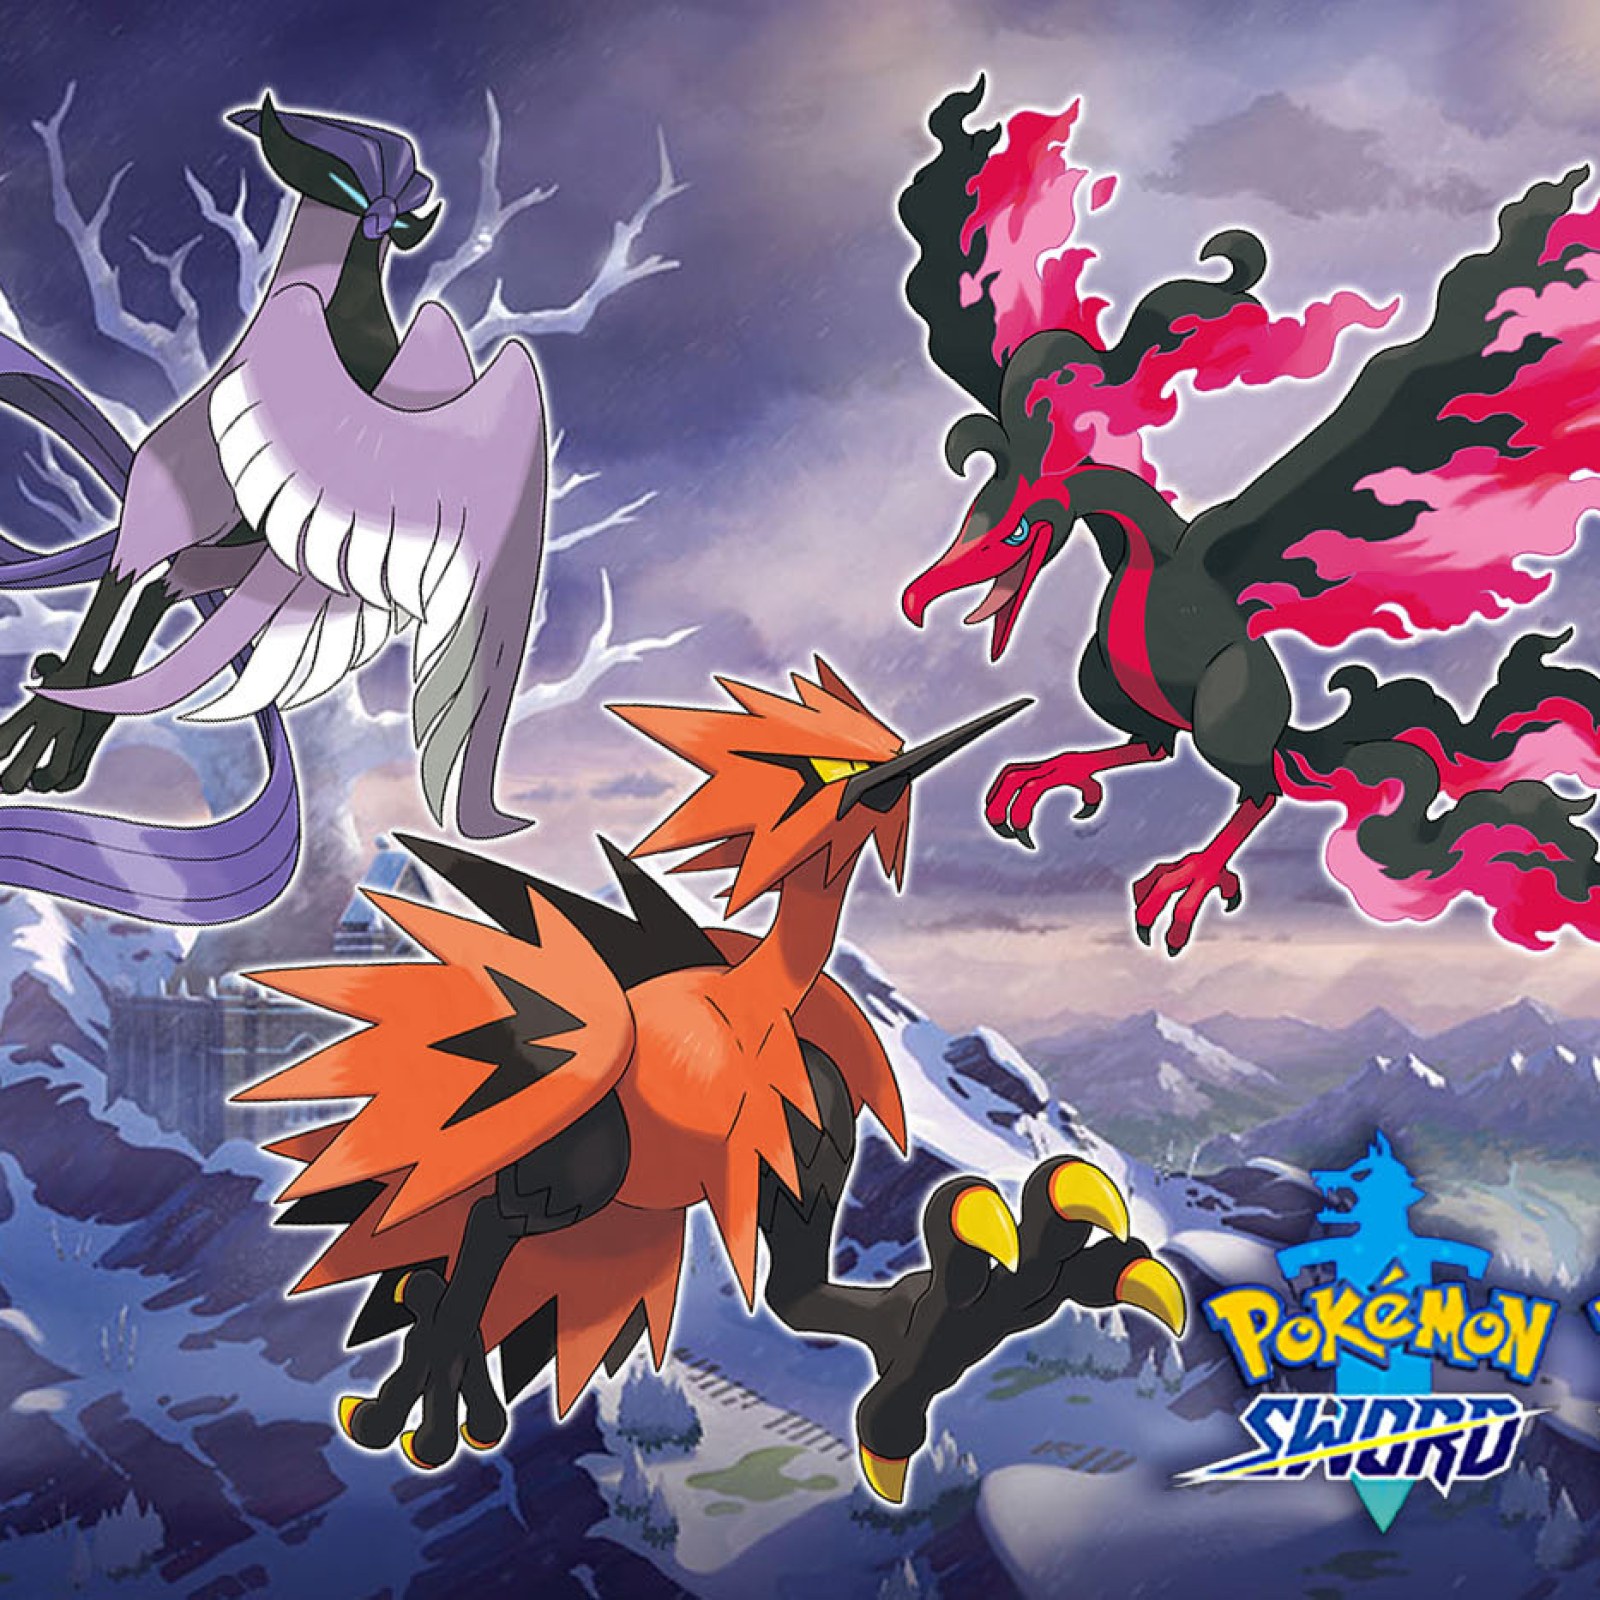 How To Catch Galarian Legendary Birds In Pokemon Sword And Shield Crown Tundra